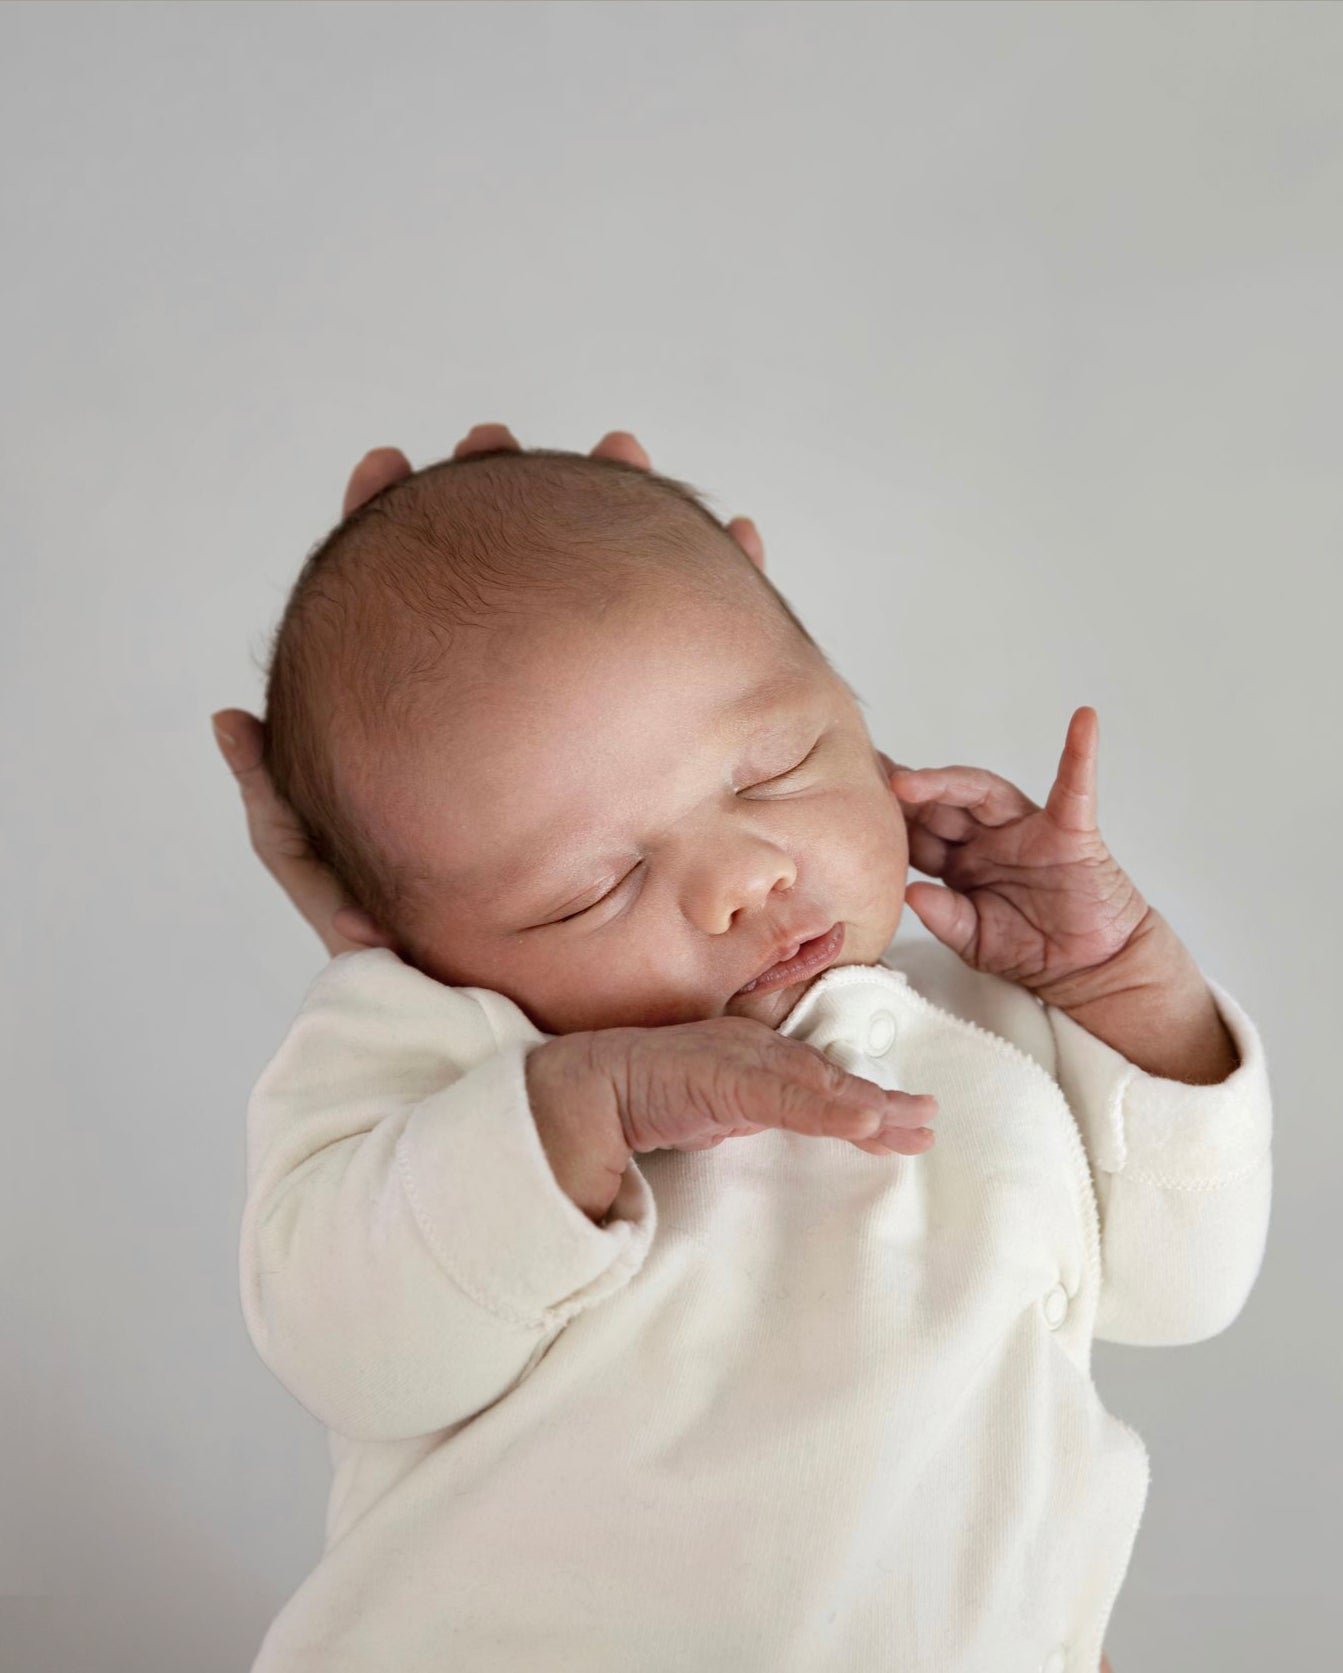 Load image into Gallery viewer, newborn outfit gifts, newborn outfit, organic clothing, the little minimalist, kids clothing shop nottingham, midlands baby shop, independent kids shop, beautiful new baby gifts
